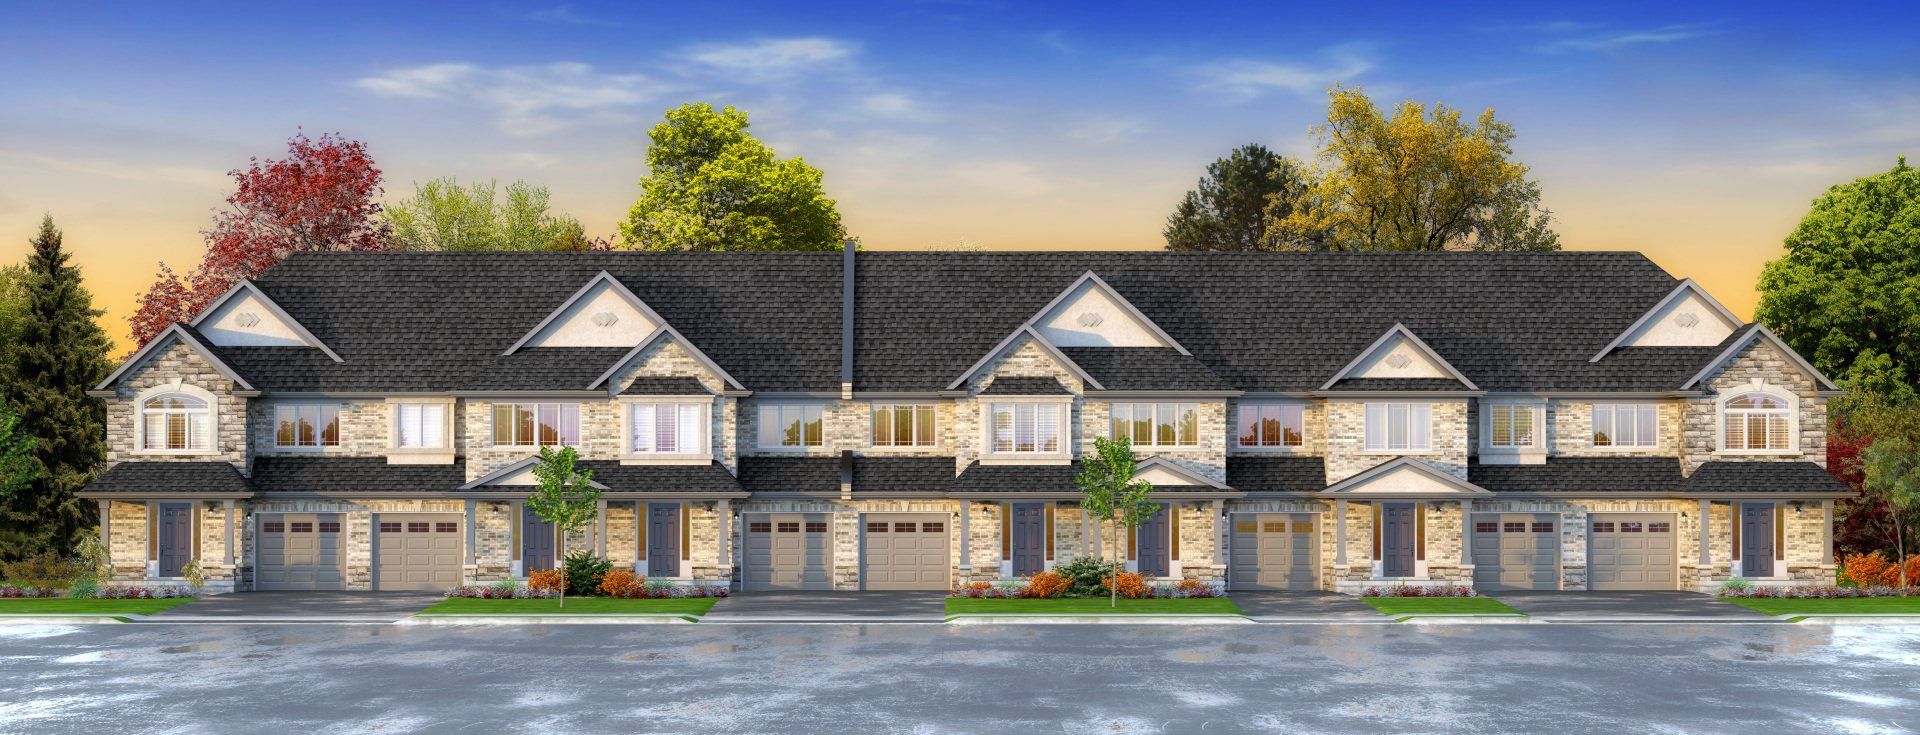 Greenview Villa Townhome Exterior Elevations